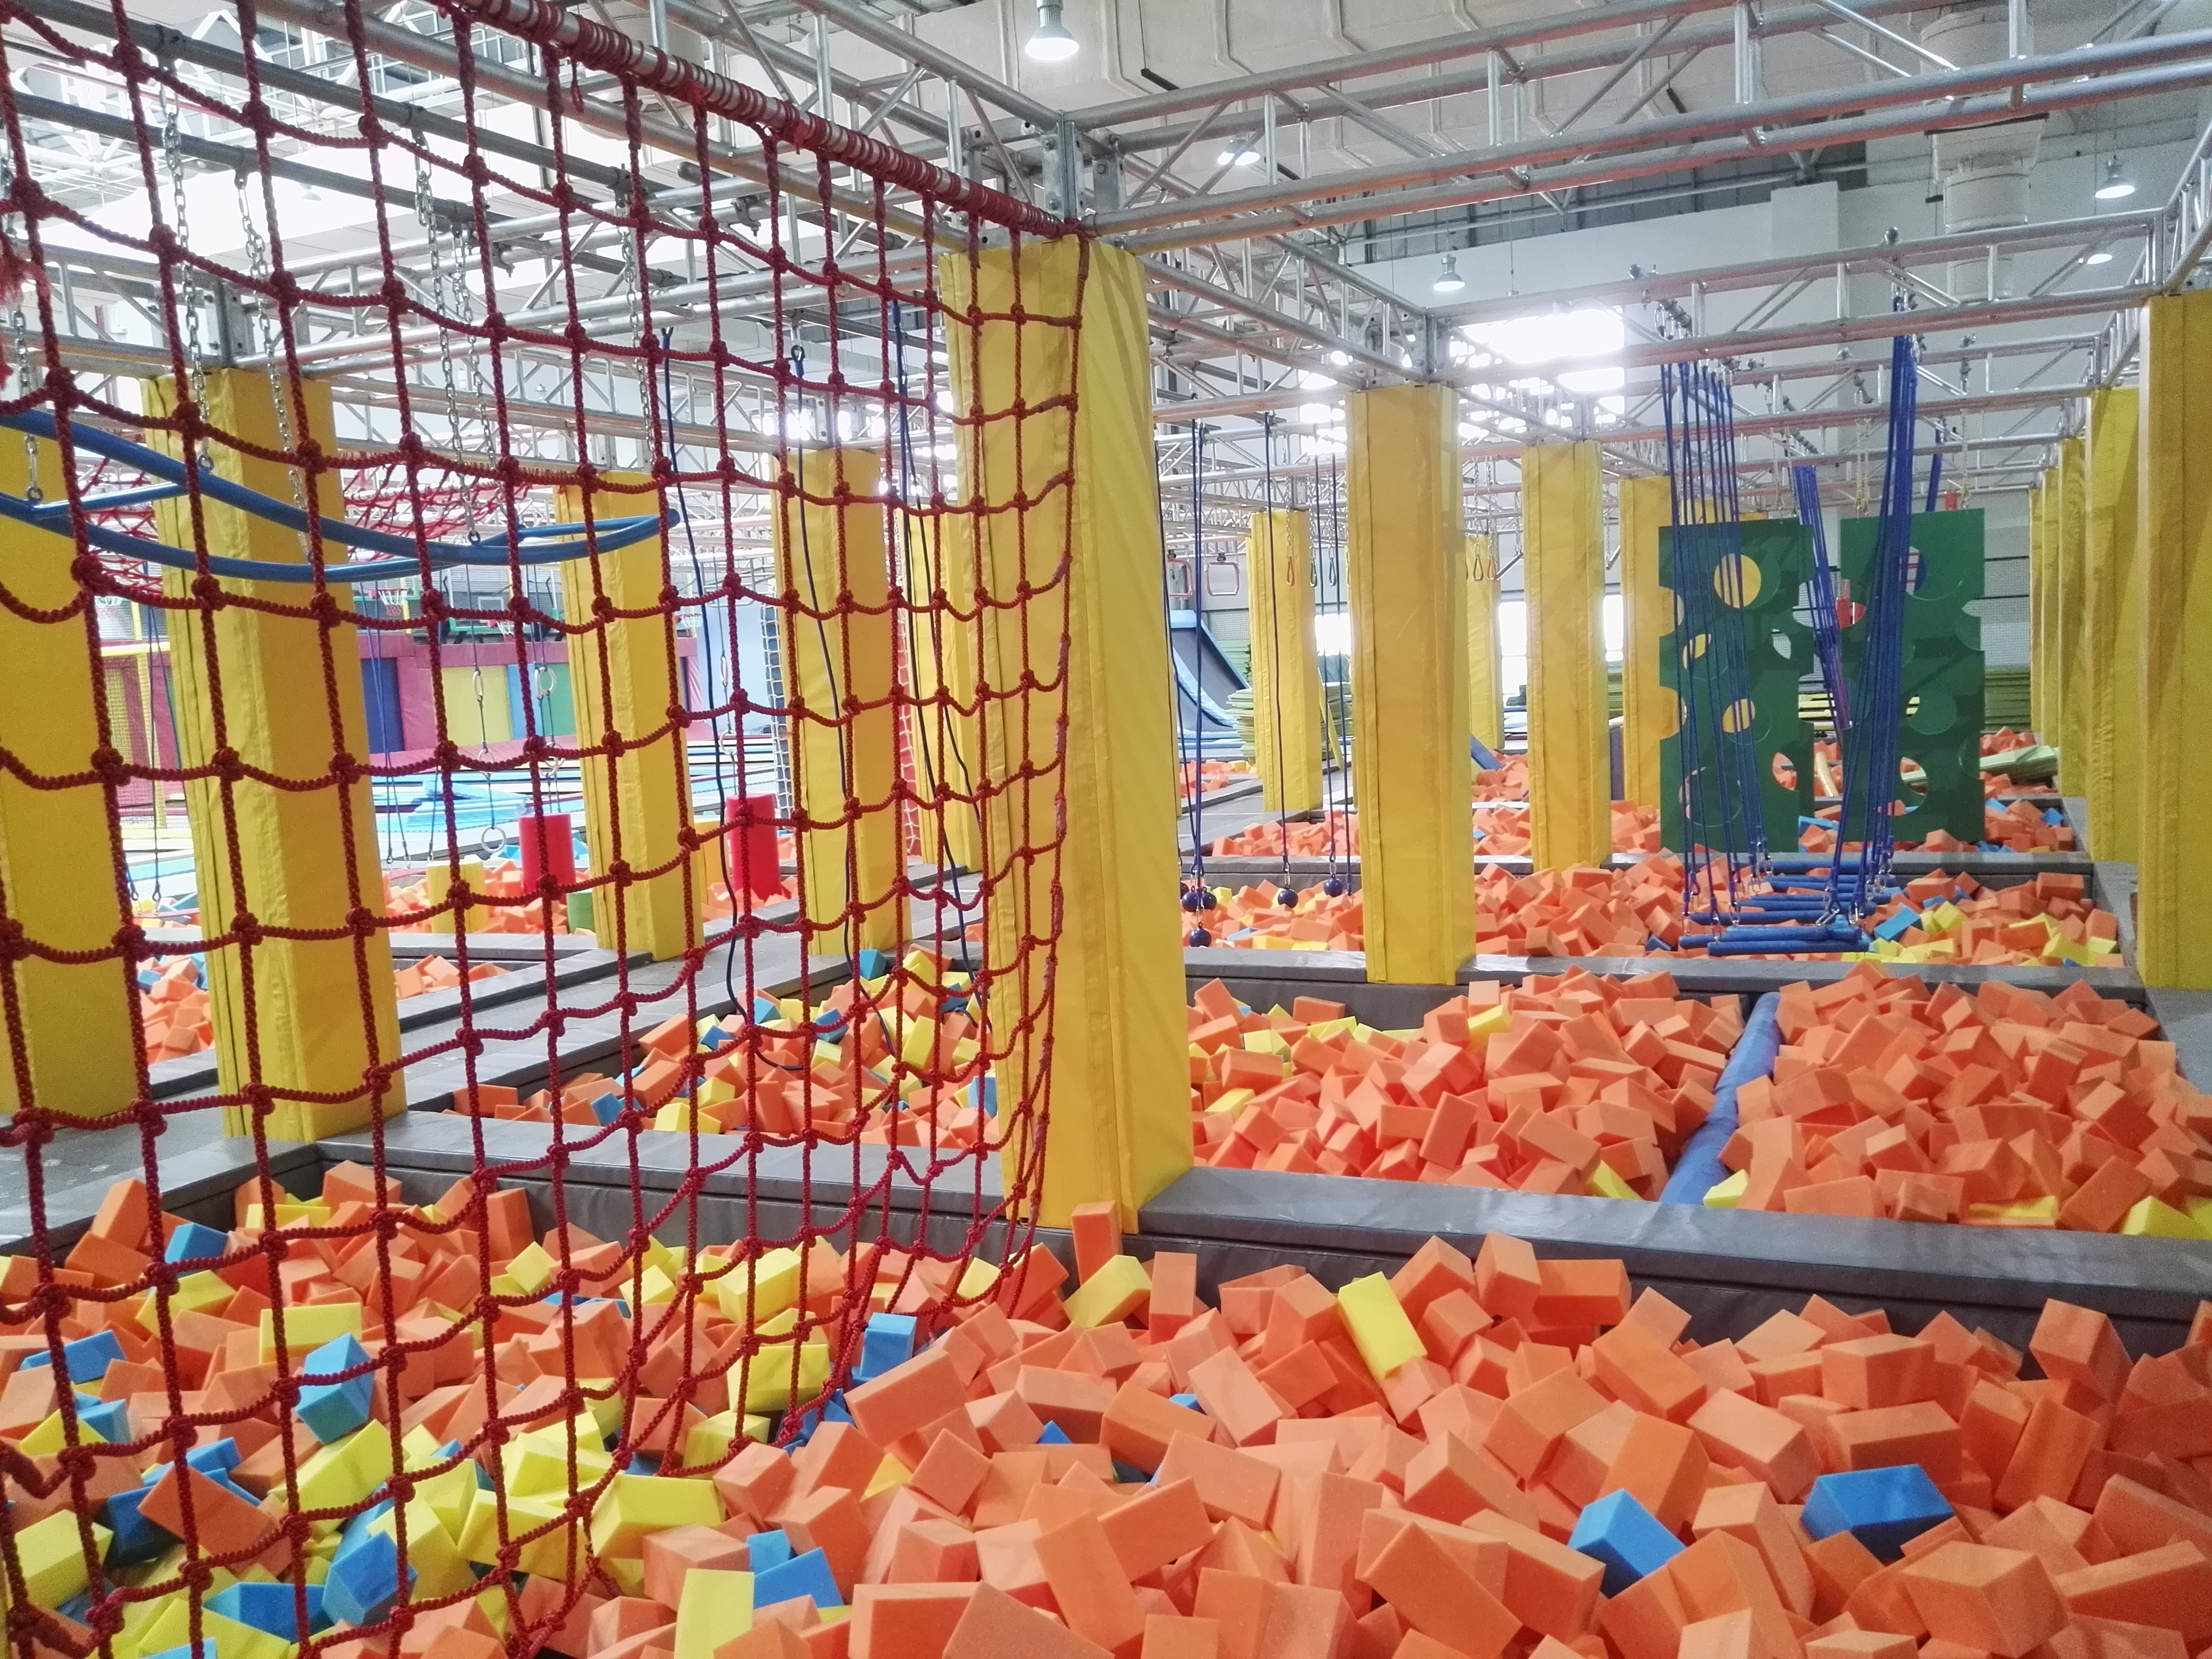 Why is indoor playground popular in a shopping mall??